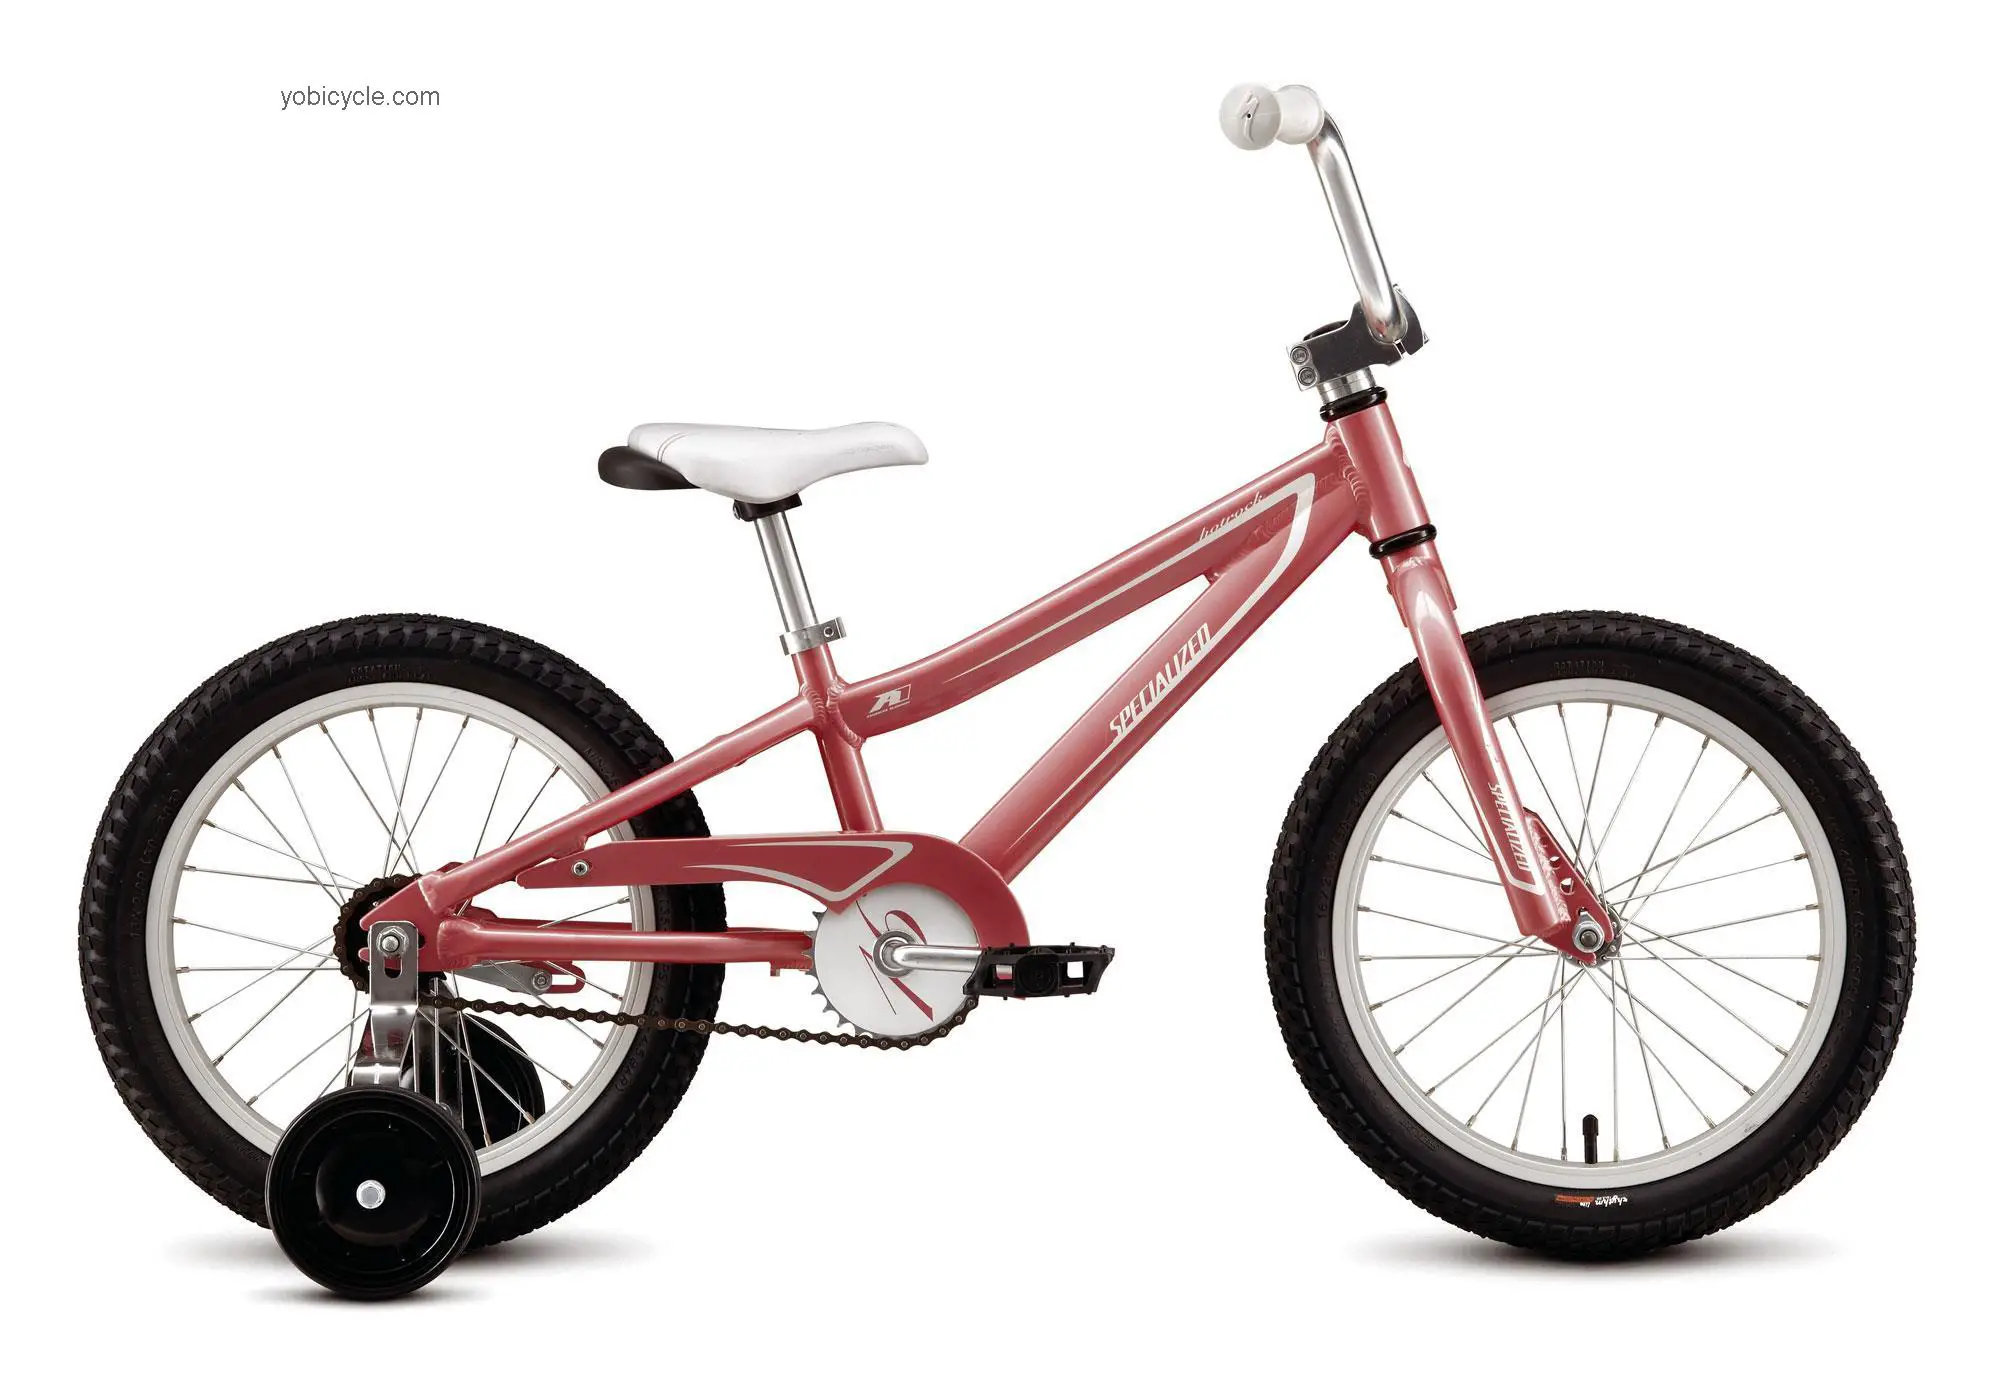 Specialized  Hotrock 16 Girls Technical data and specifications